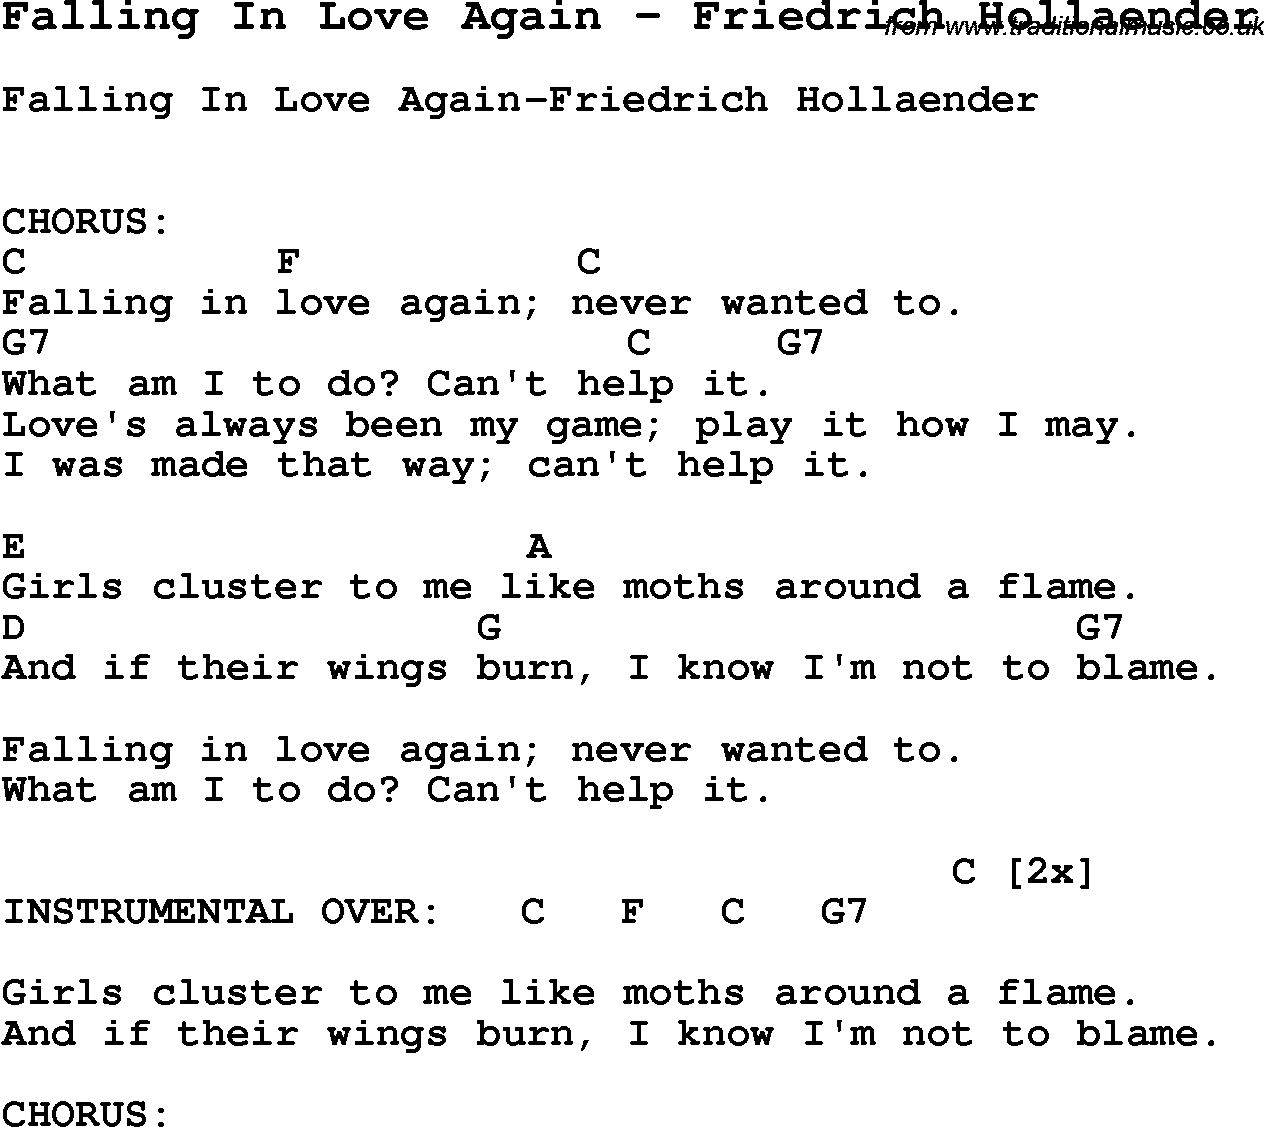 Song Falling In Love Again by Friedrich Hollaender, with lyrics for vocal performance and accompaniment chords for Ukulele, Guitar Banjo etc.